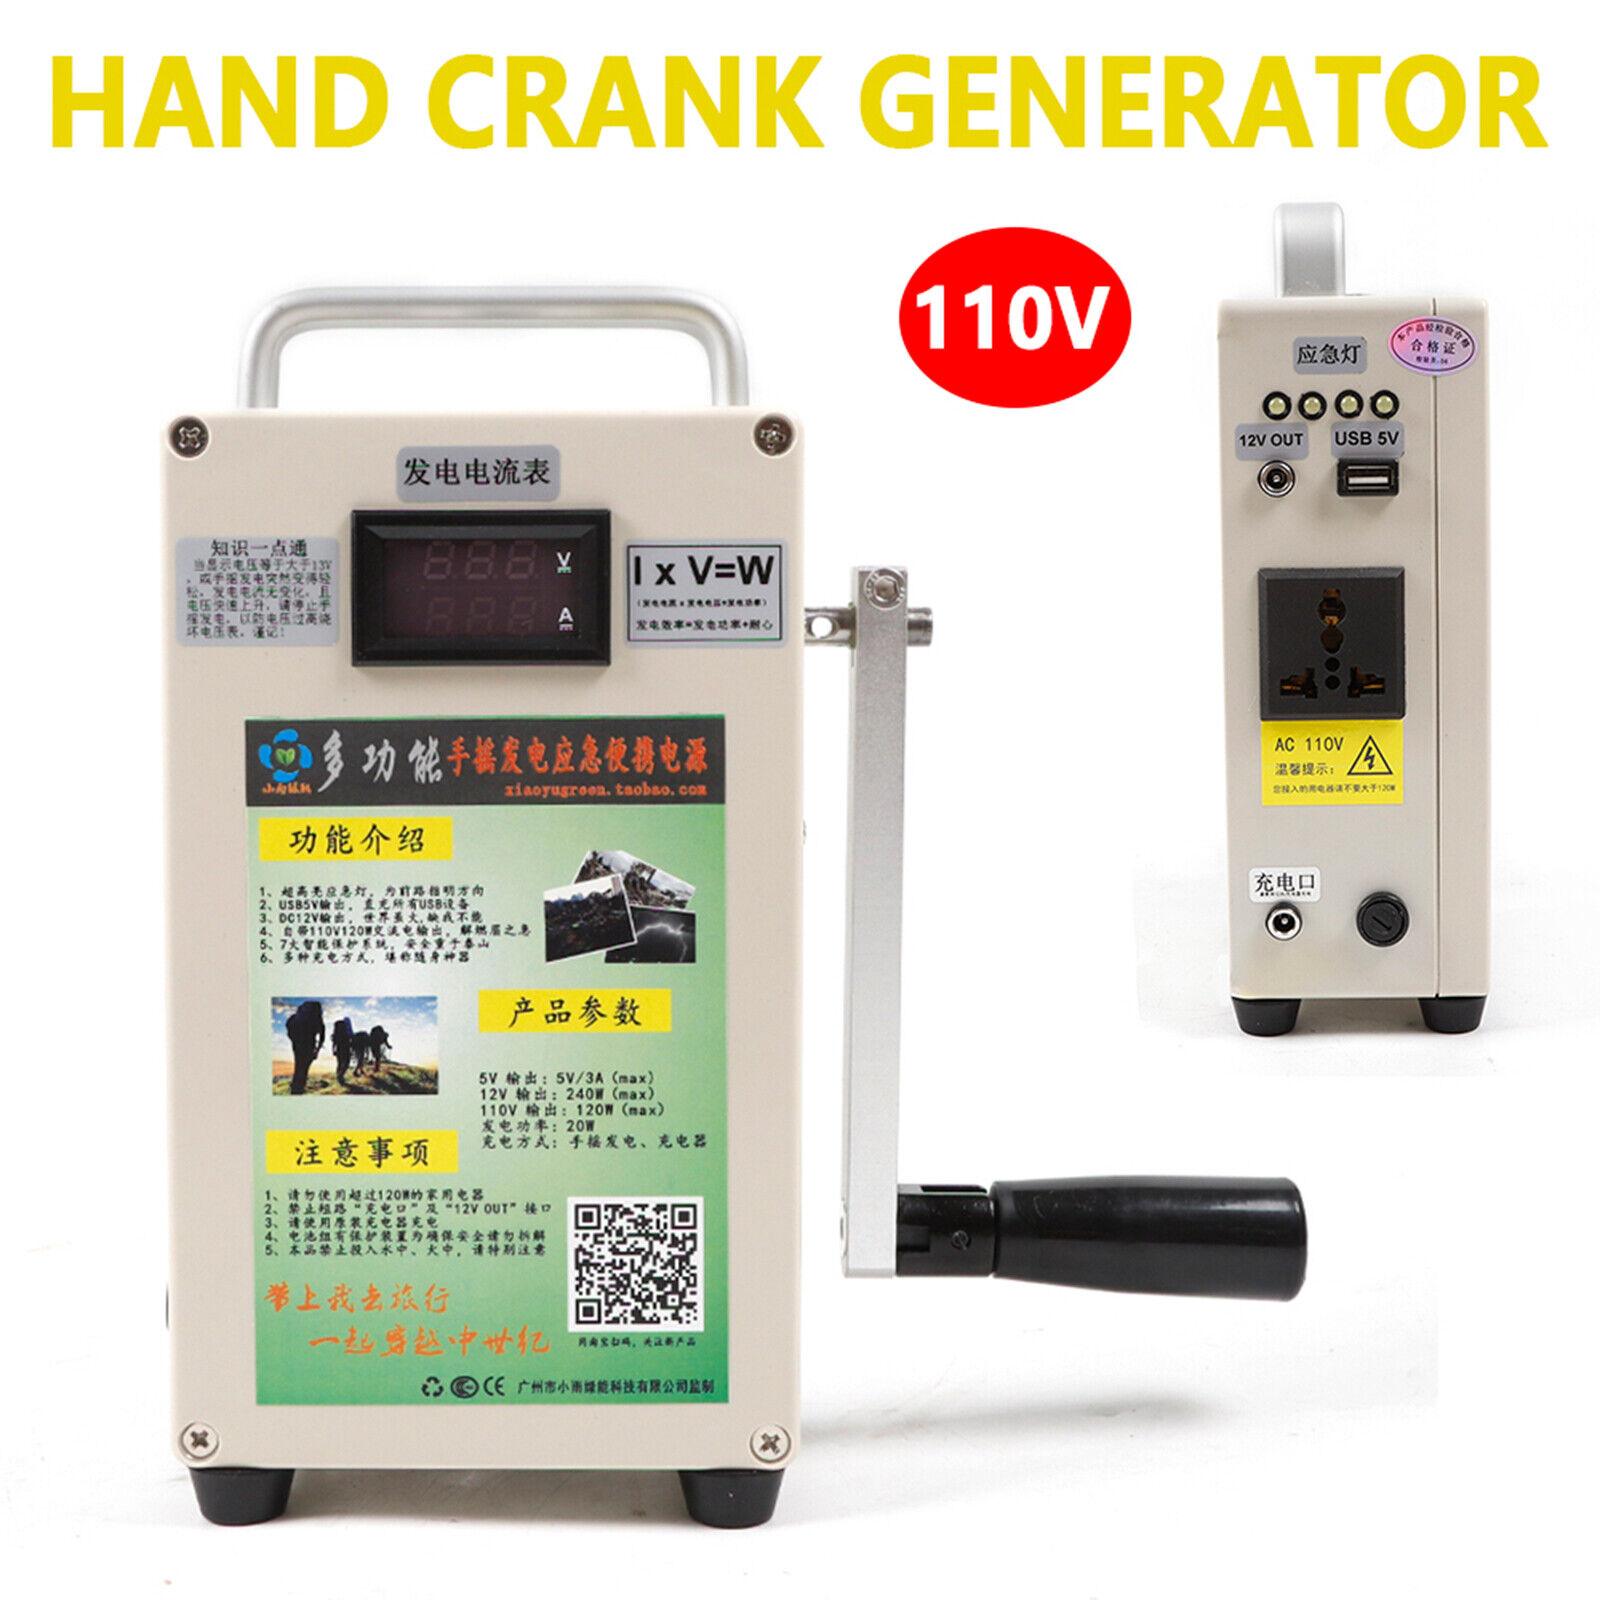 110V Hand Crank Generator Emergency USB Charger Camping Outdoor Survival TOP Unbranded Does Not Apply